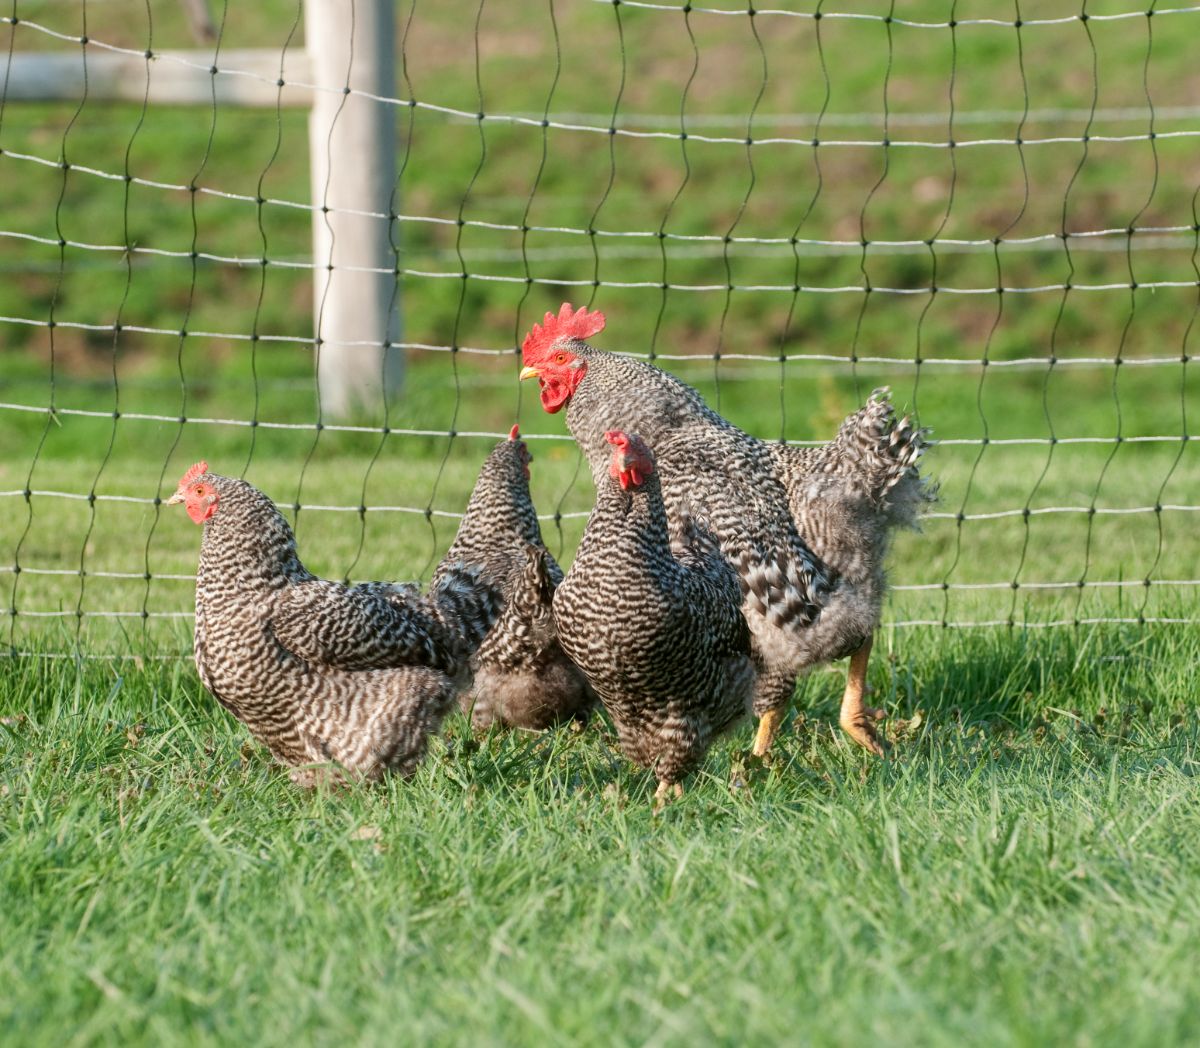 Barred rock chicken and rooster on green grass.